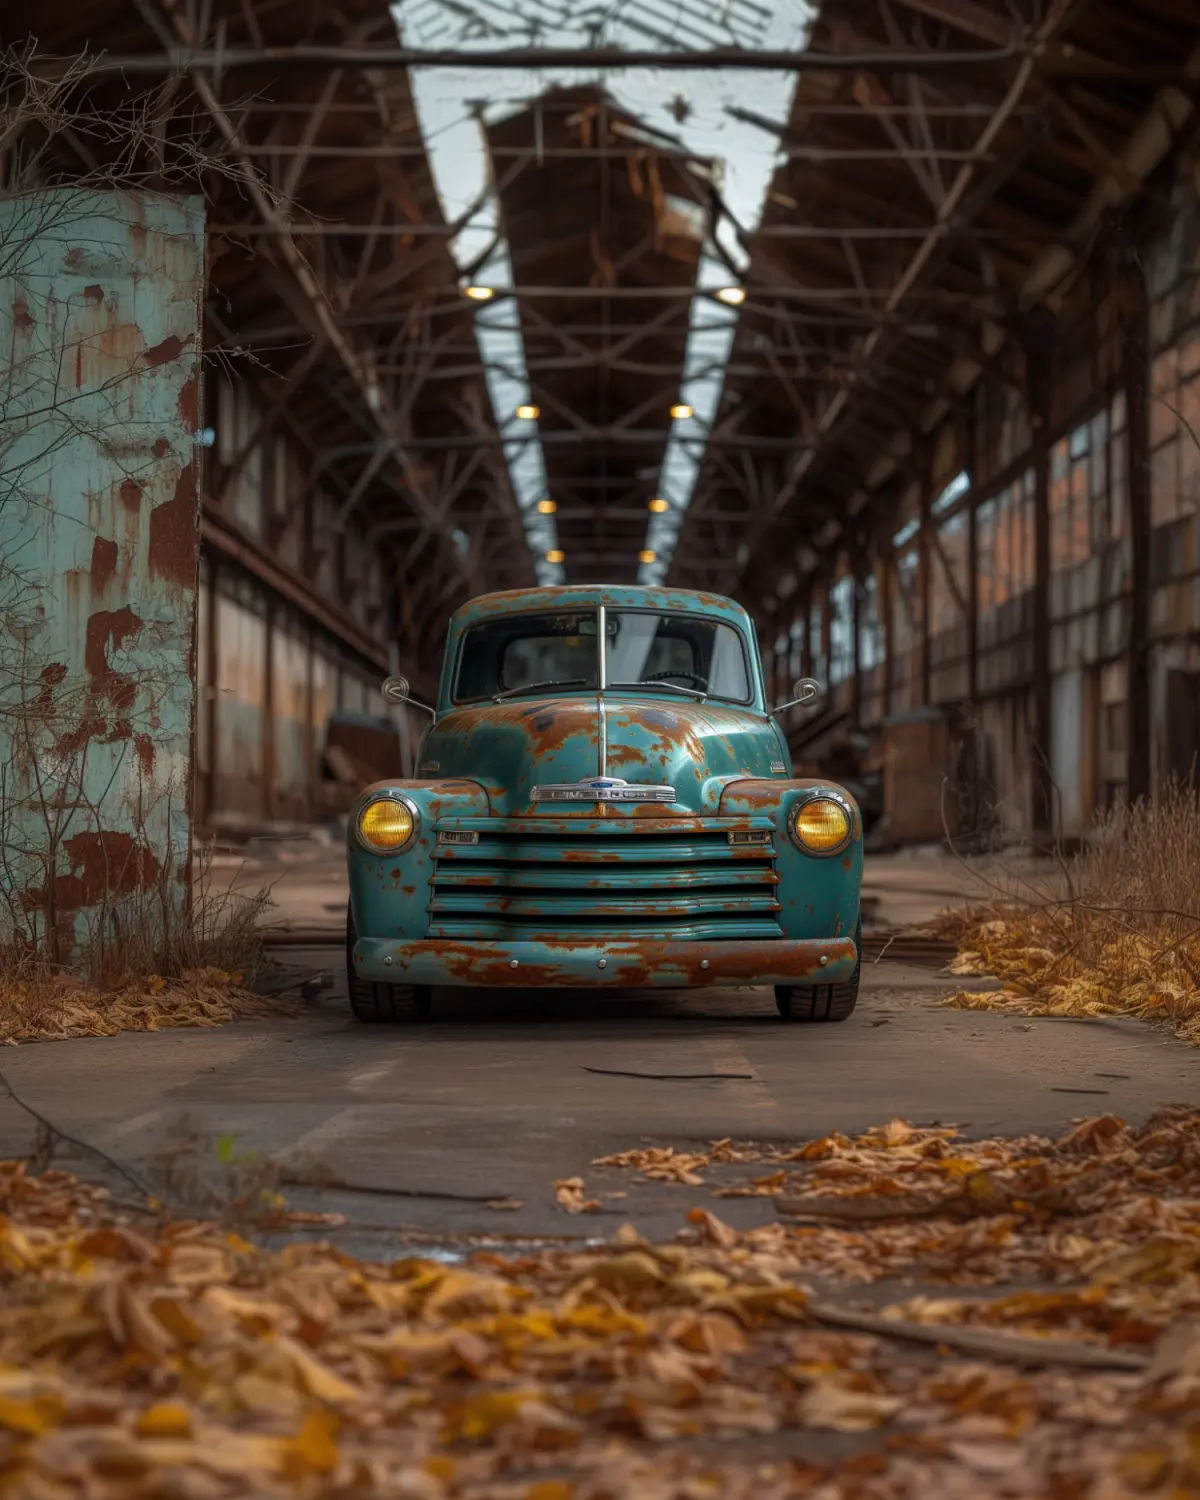 Vintage Chevy 3100 with a patina finish and modern chassis near a rustic barn